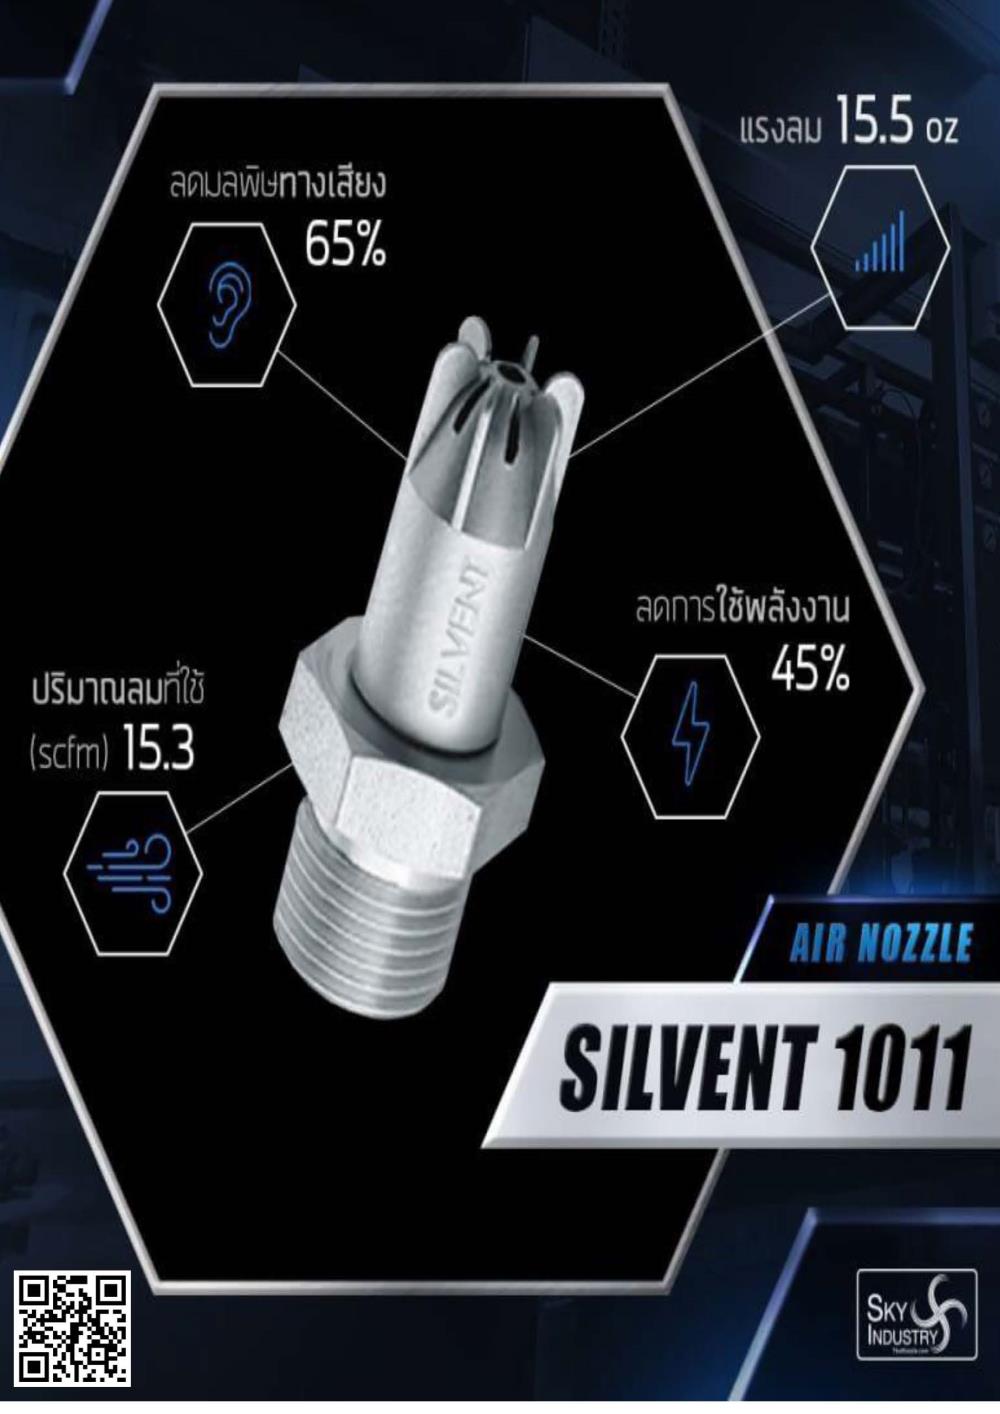 SILVENT Nozzles Model: 1011,หัวฉีดลม ,Silvent,Industrial Services/Advertising